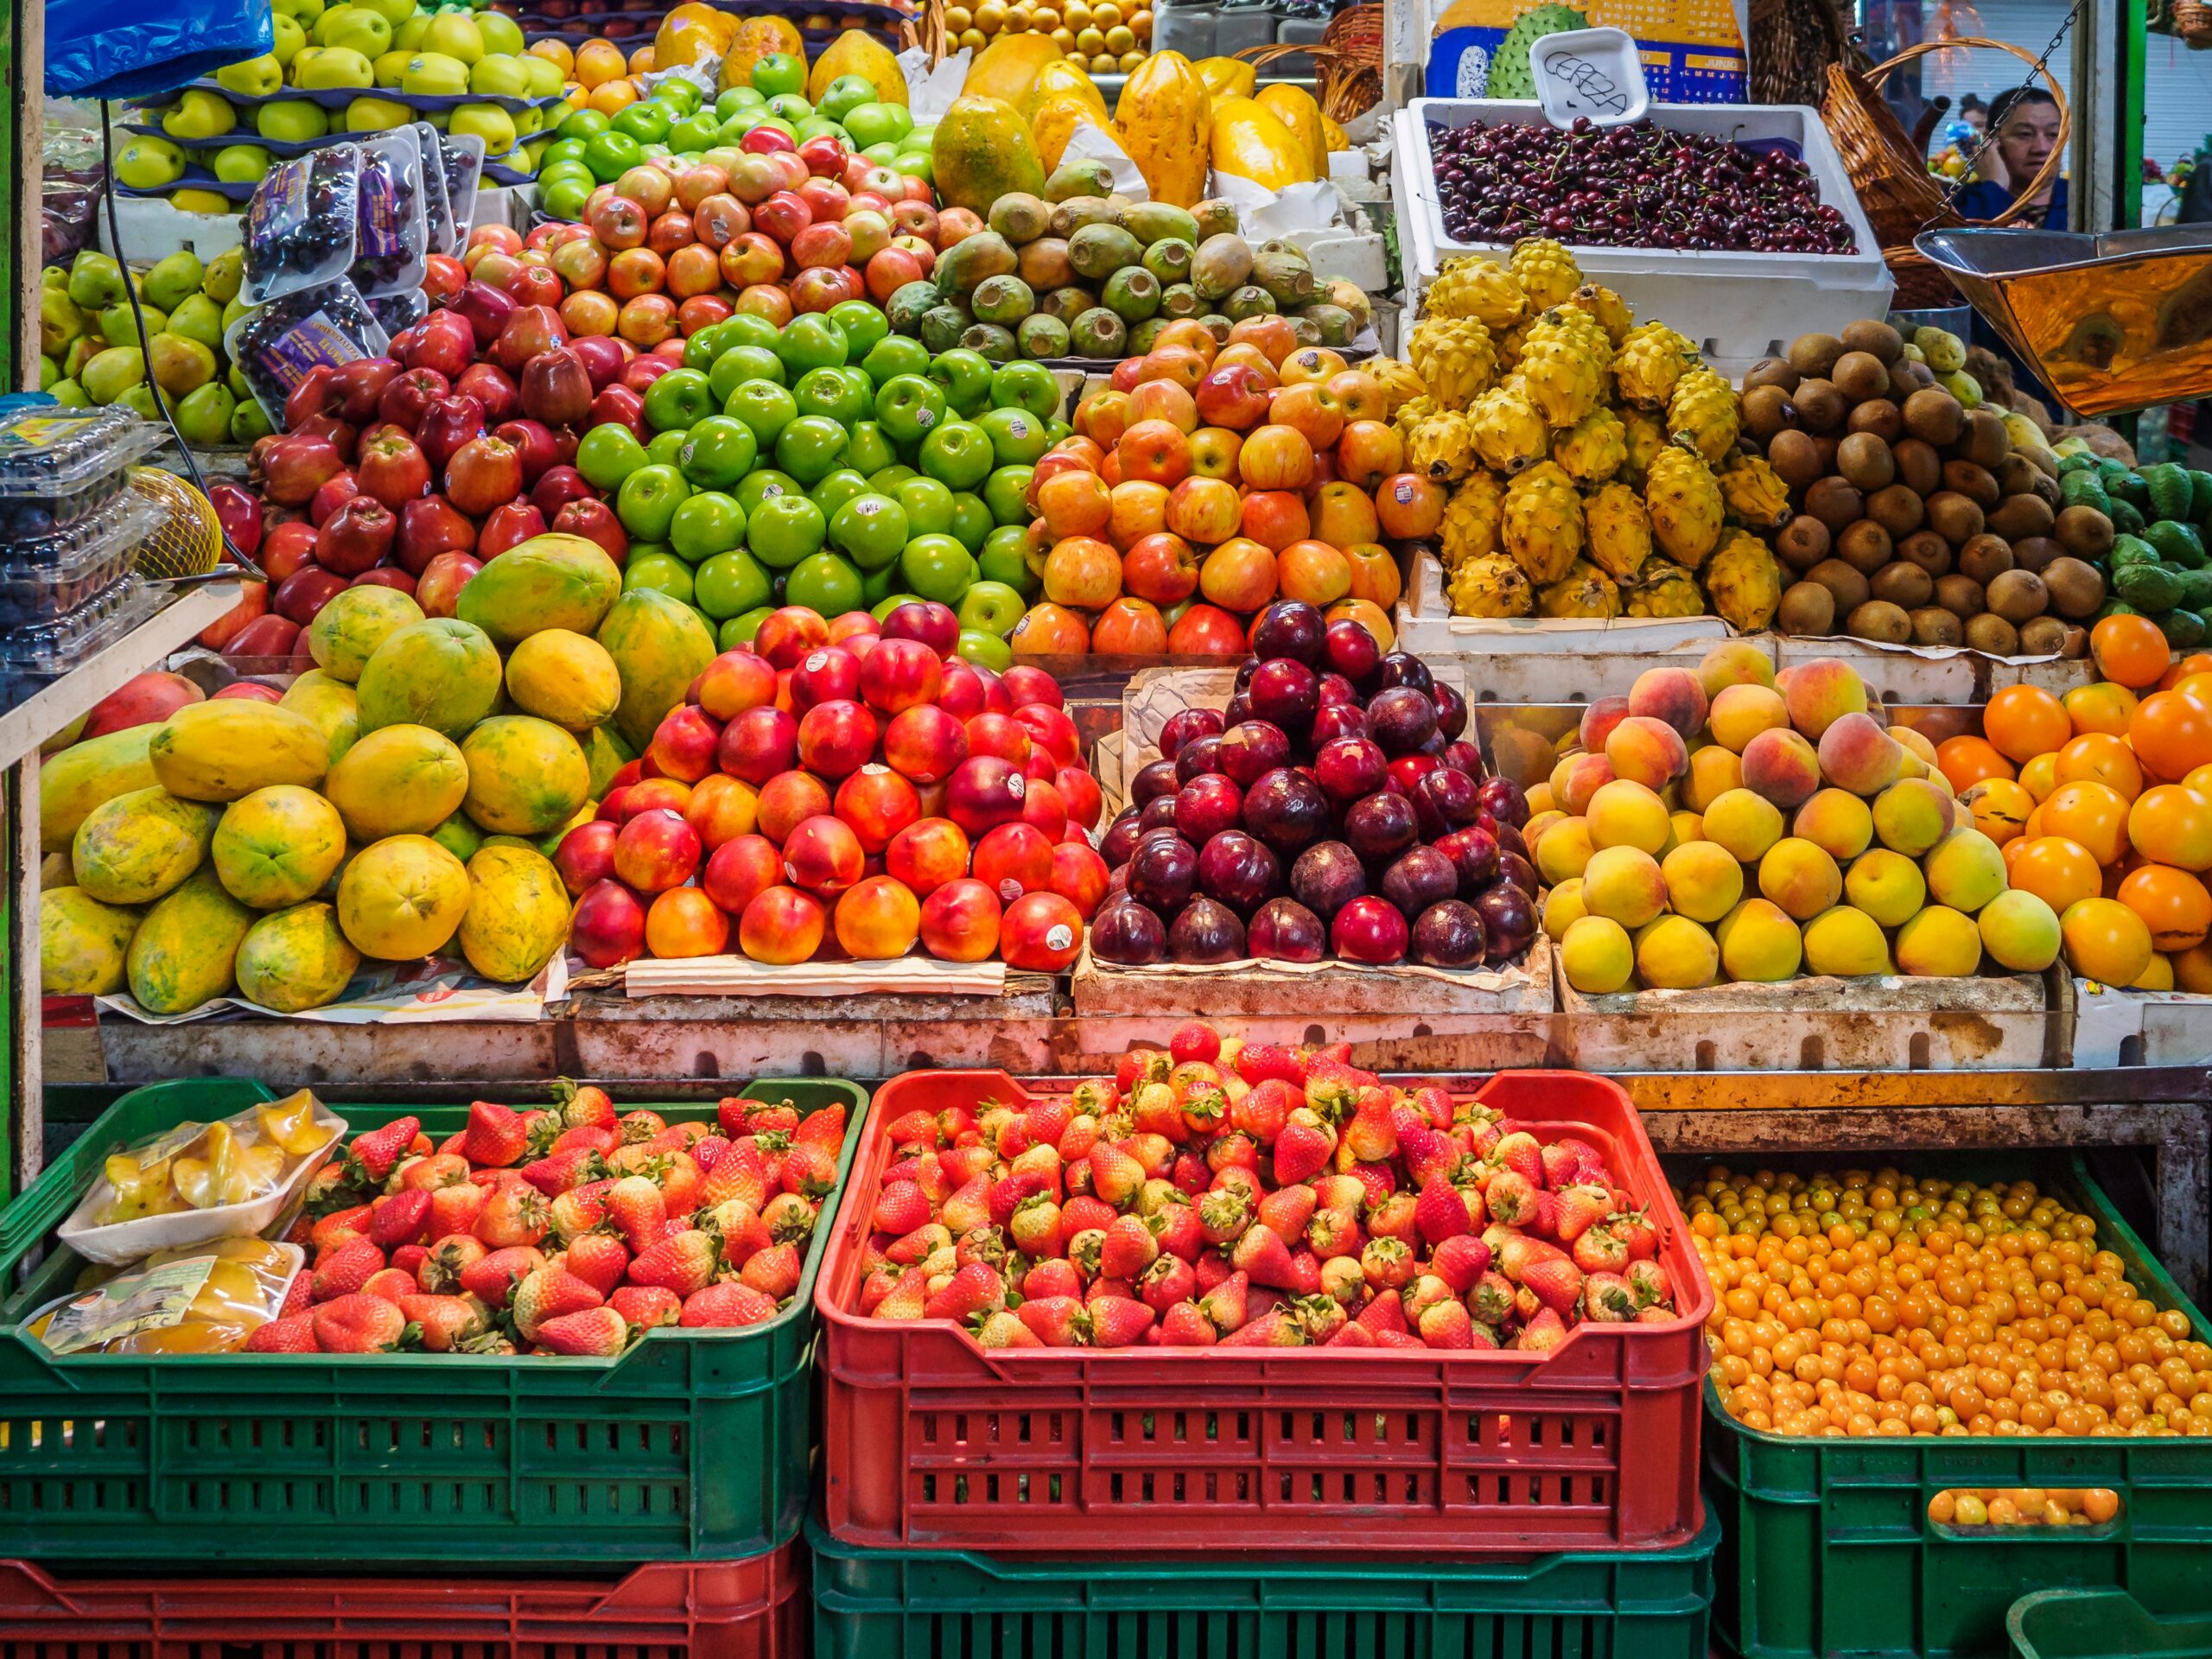 Fruit stall with abundance of fresh, bright fruit, including strawberries, plums, apples, cherries, kiwifruit, oranges and more